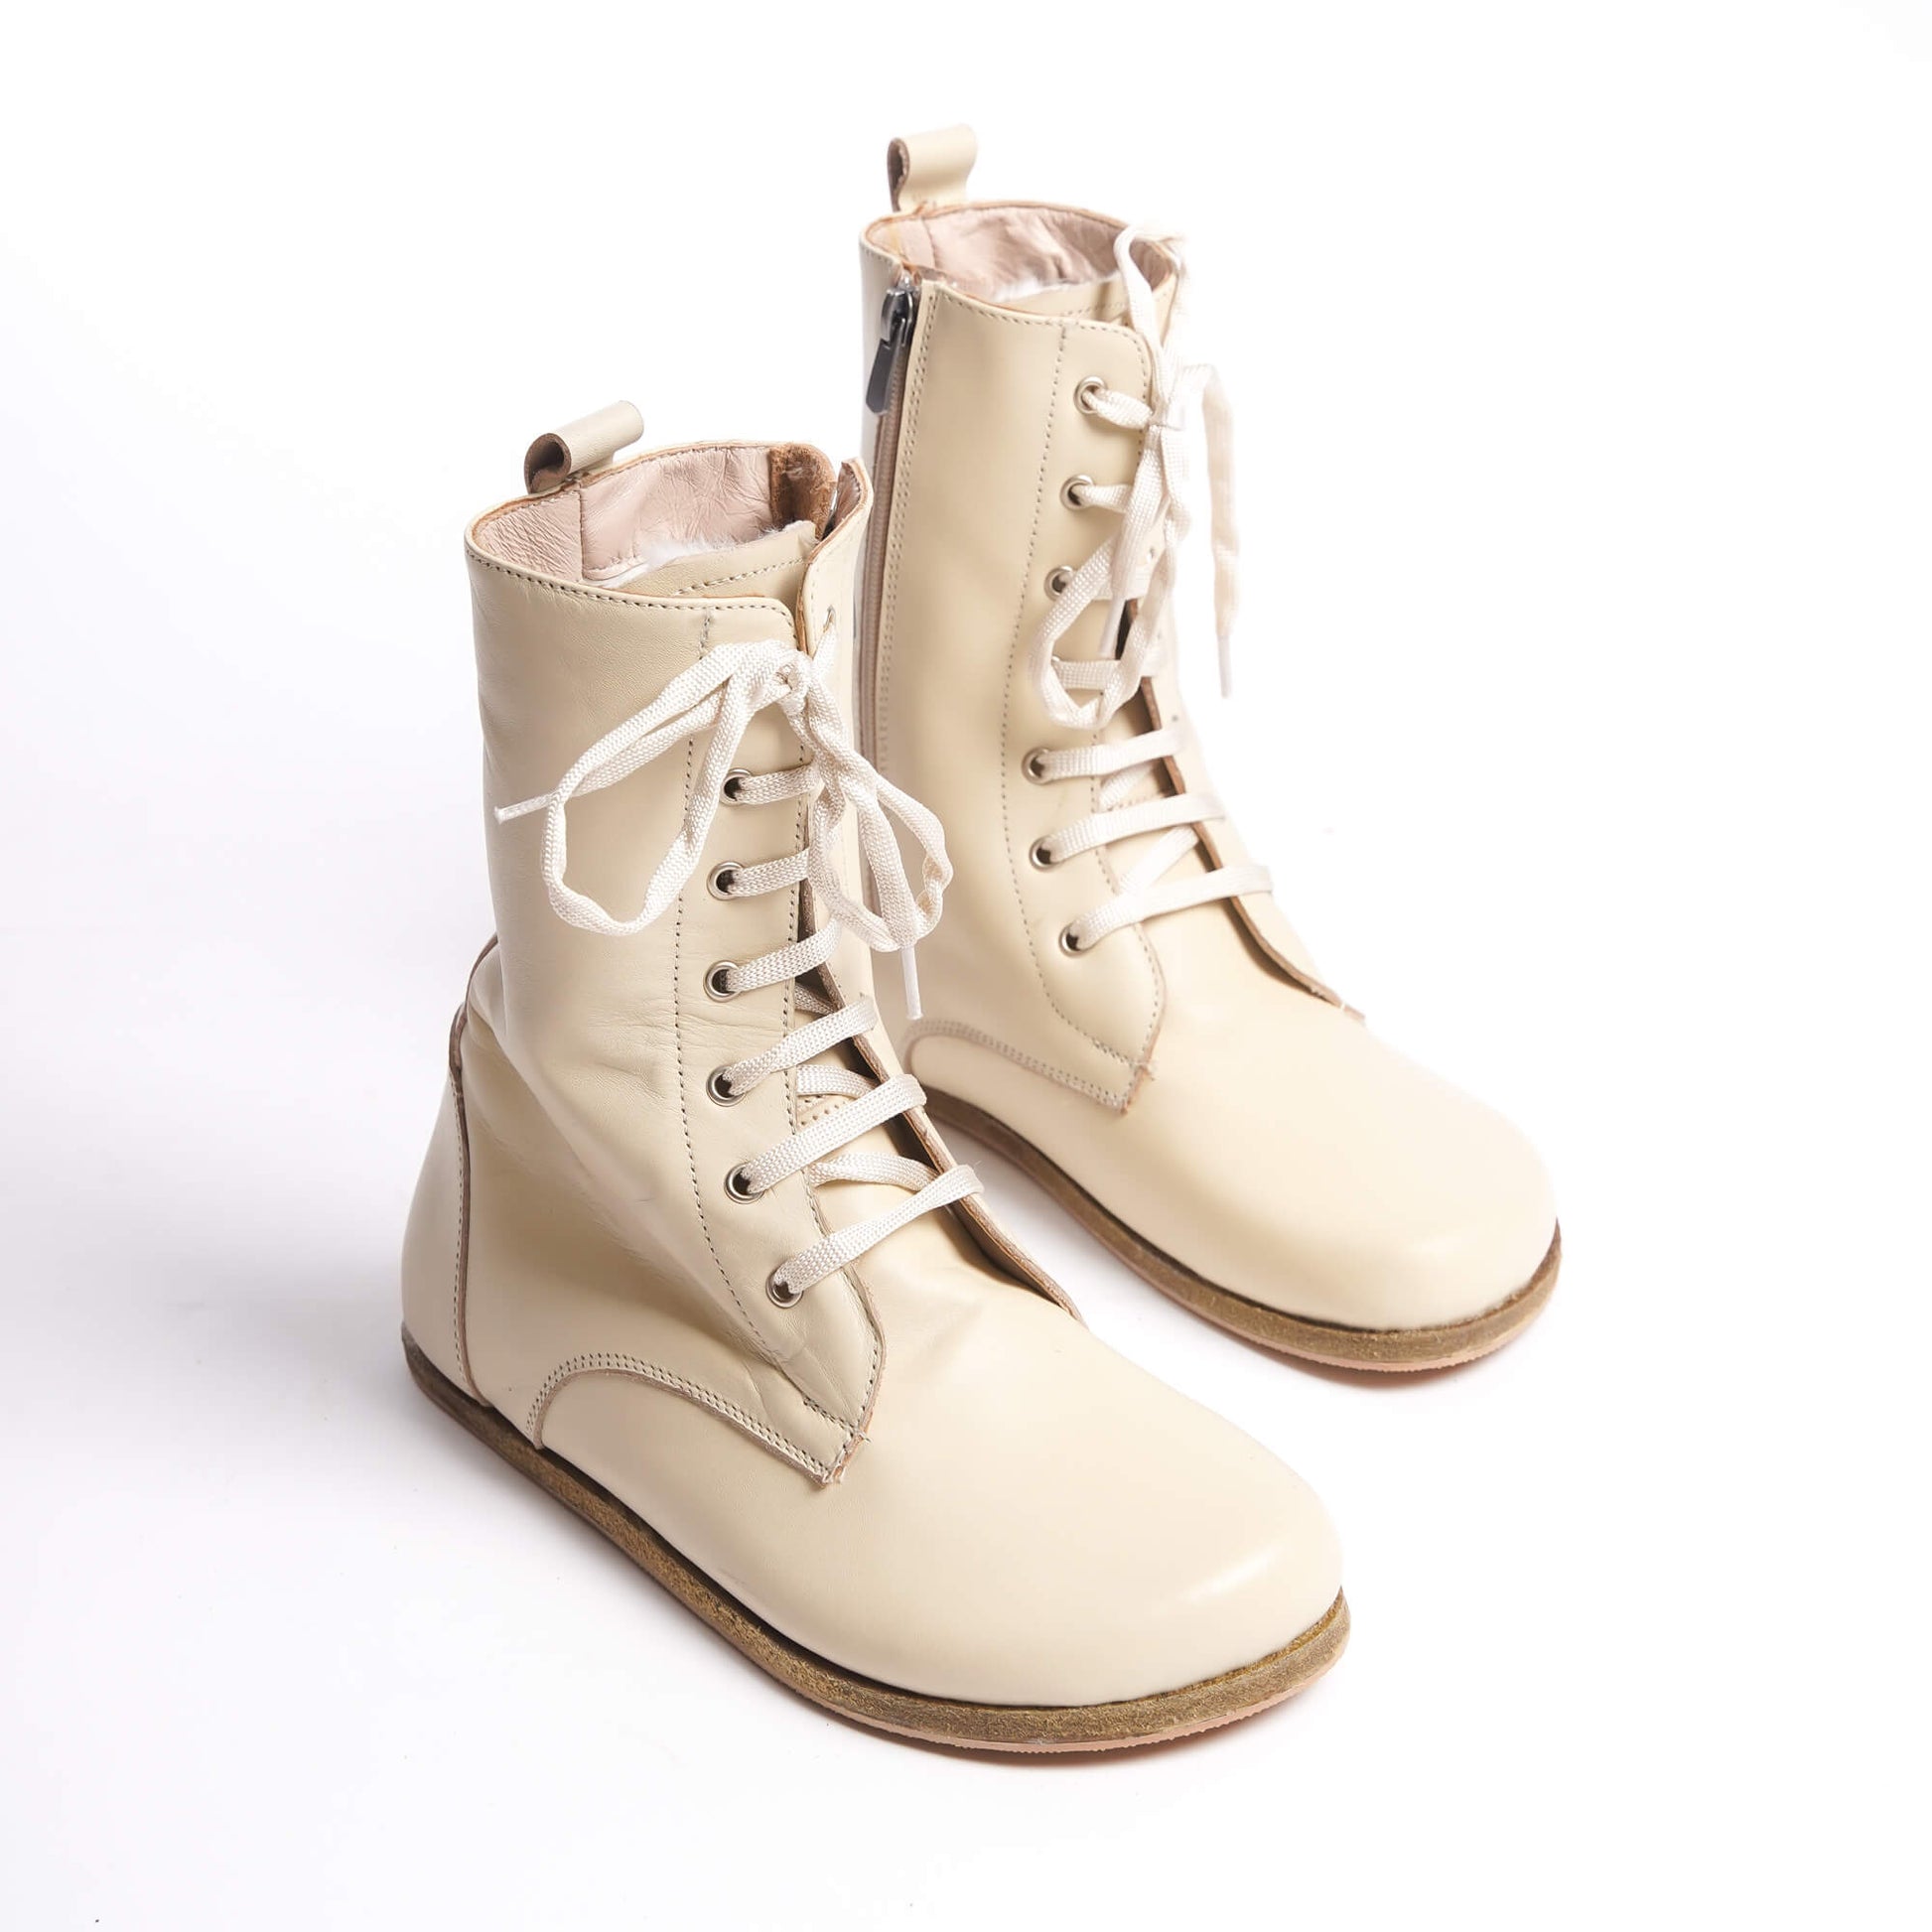 High ankle barefoot winter women's boots in cream, made from genuine natural leather. Combining style and comfort with every step.